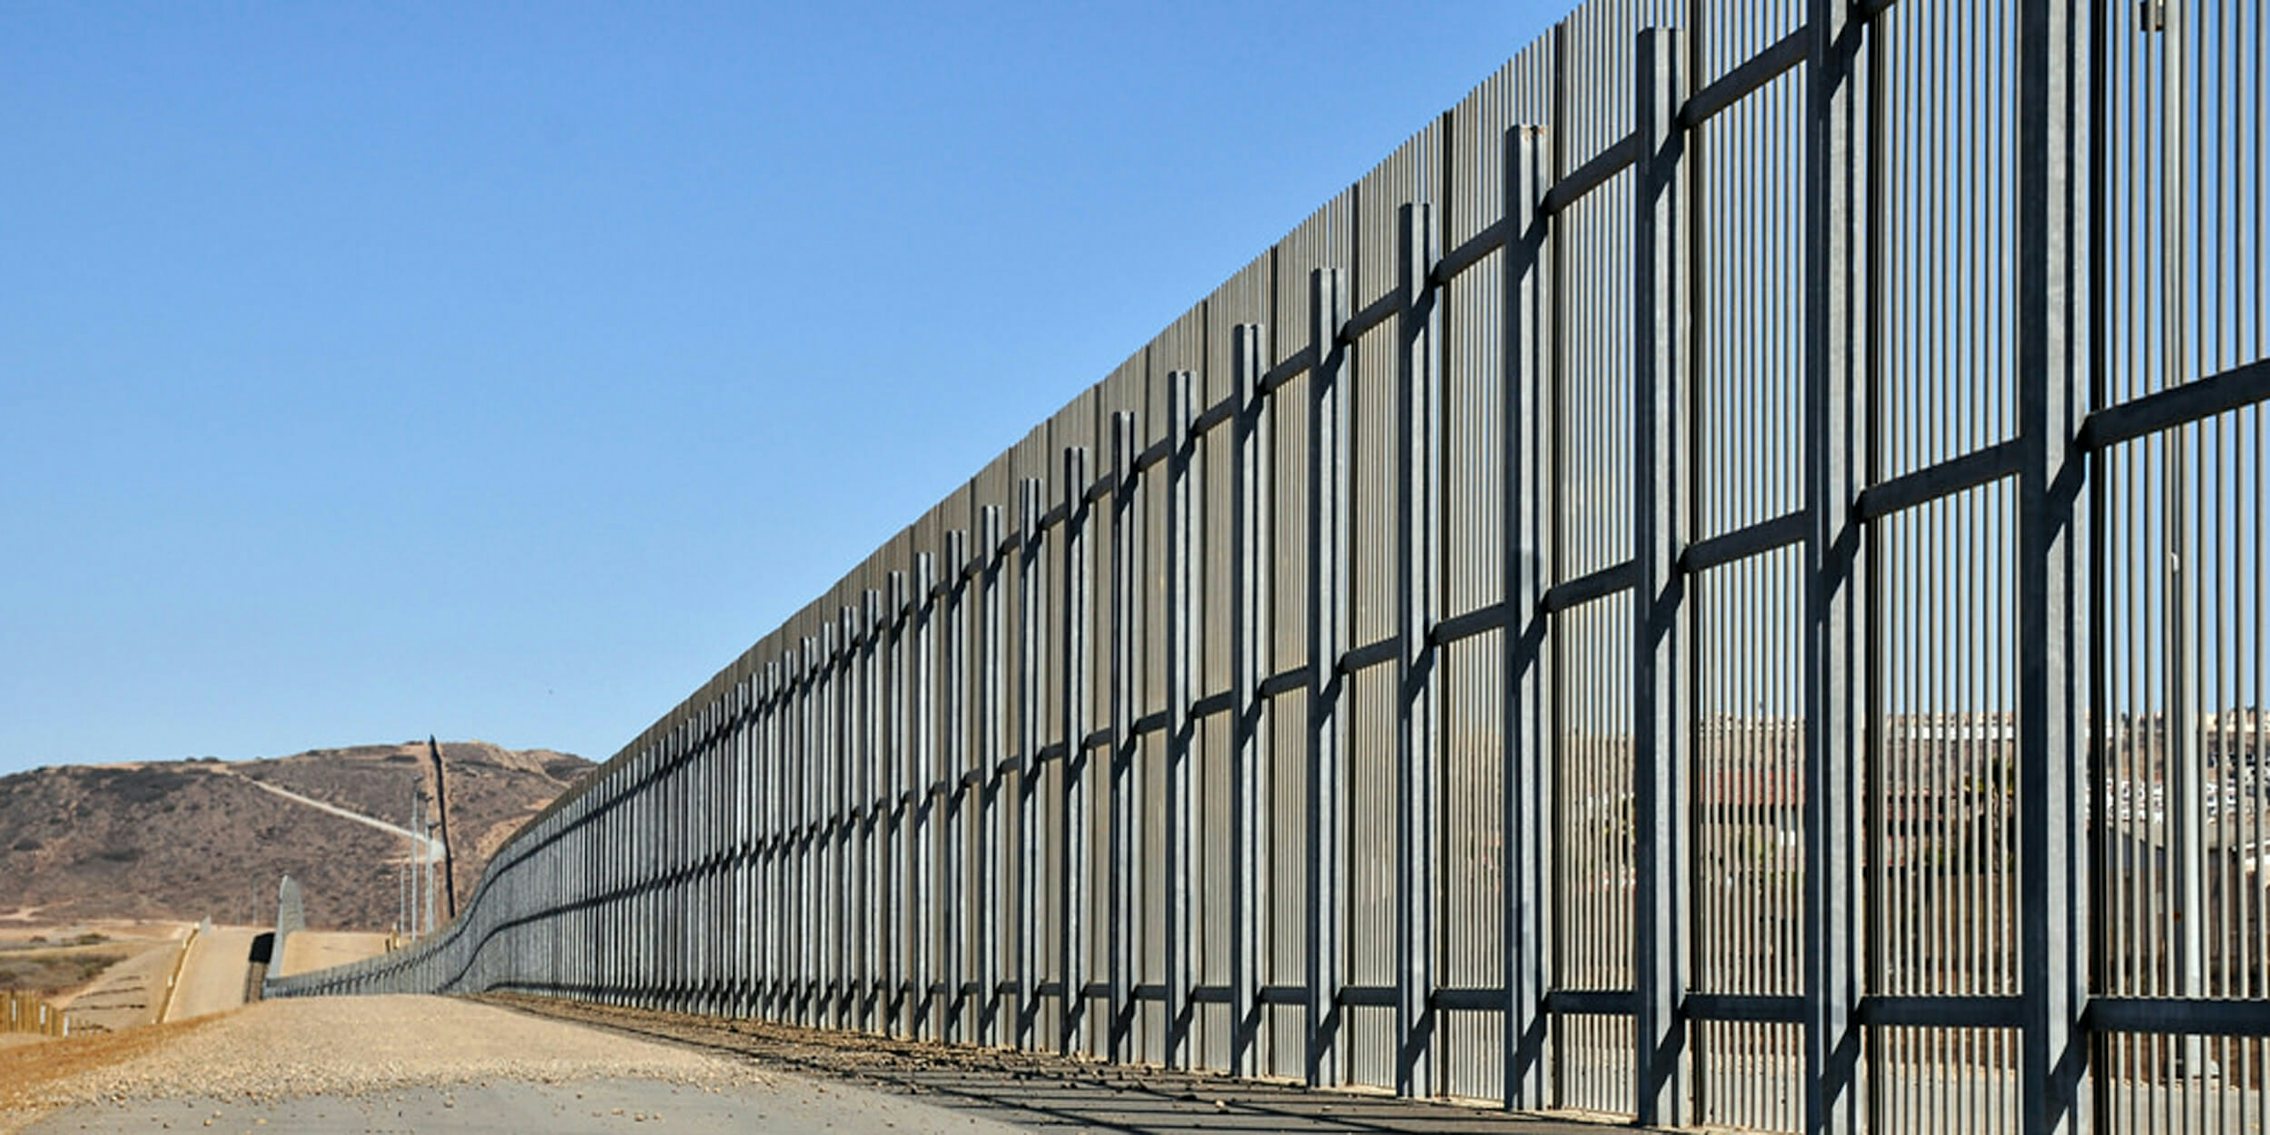 Mexico said it wont pay for Trump's border wall.